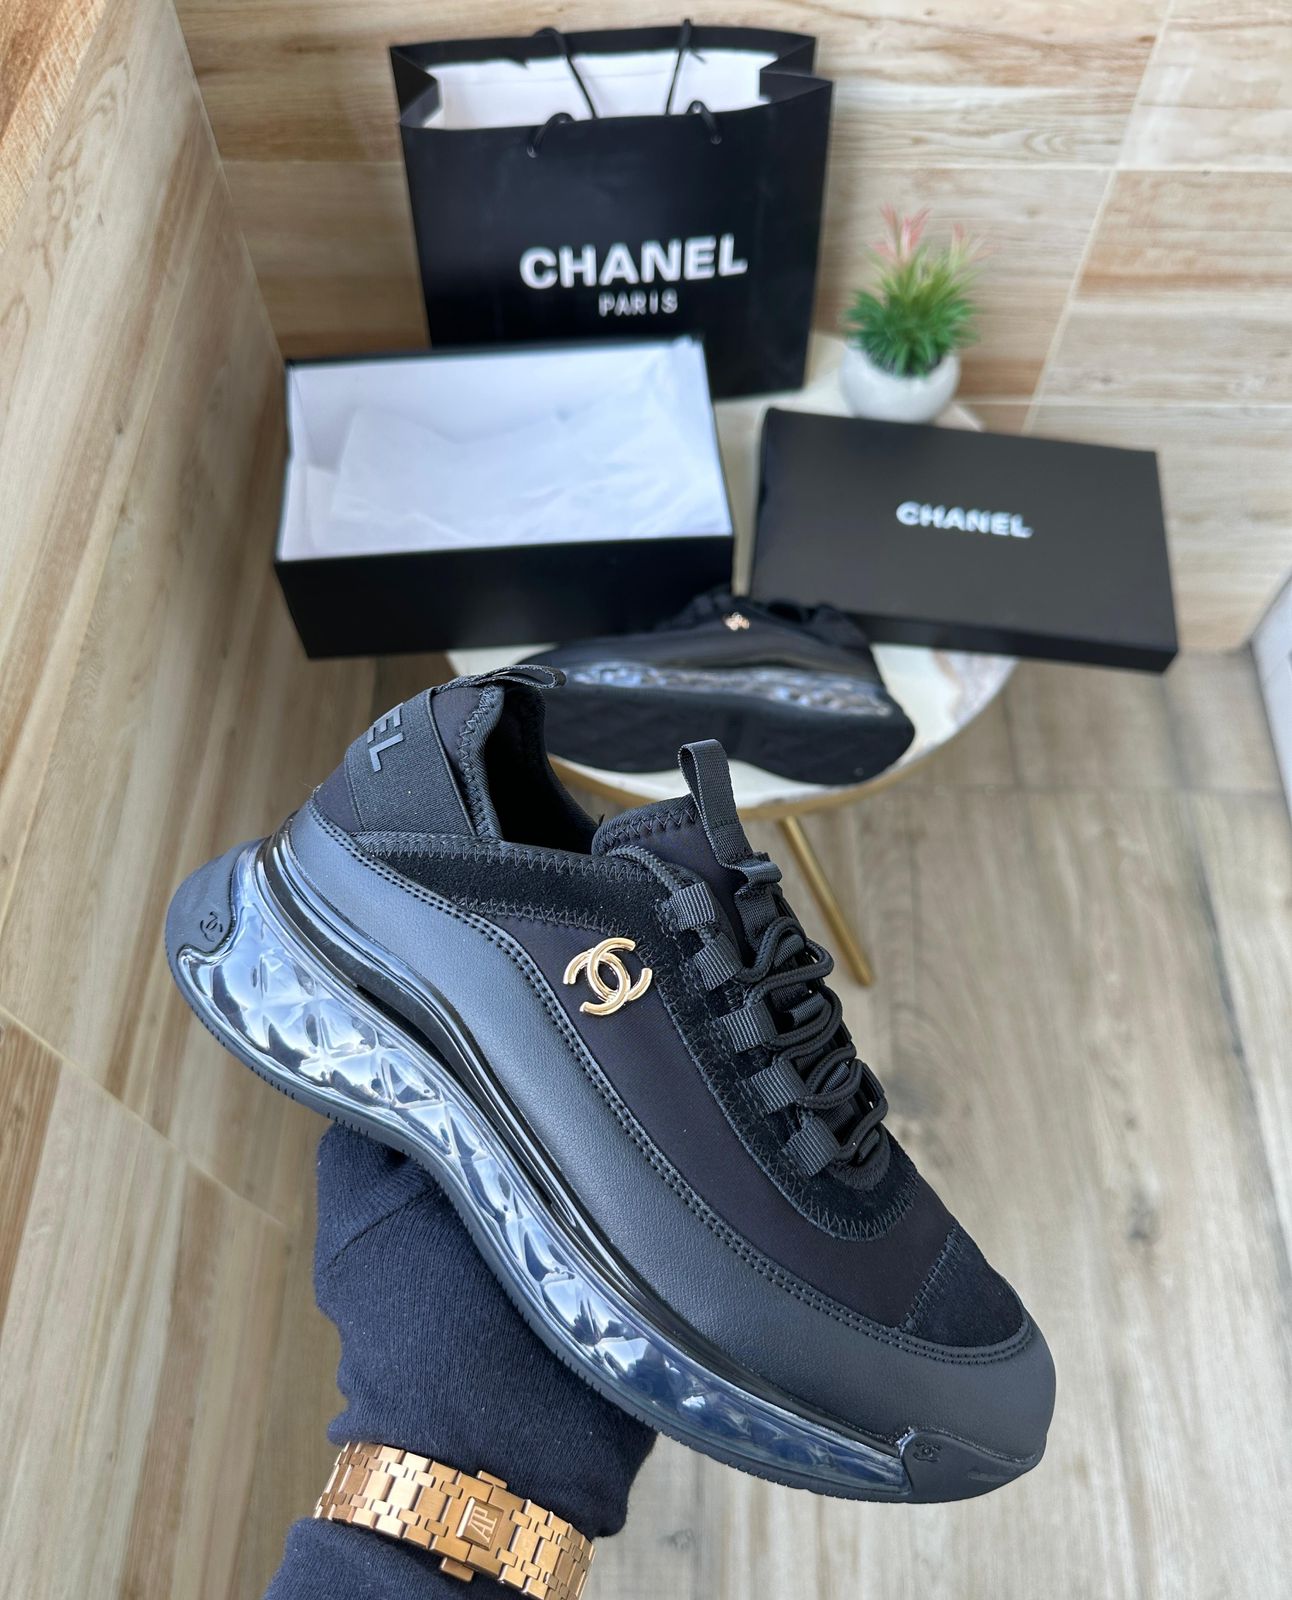 Chanel First Copy Sneakers In Stock